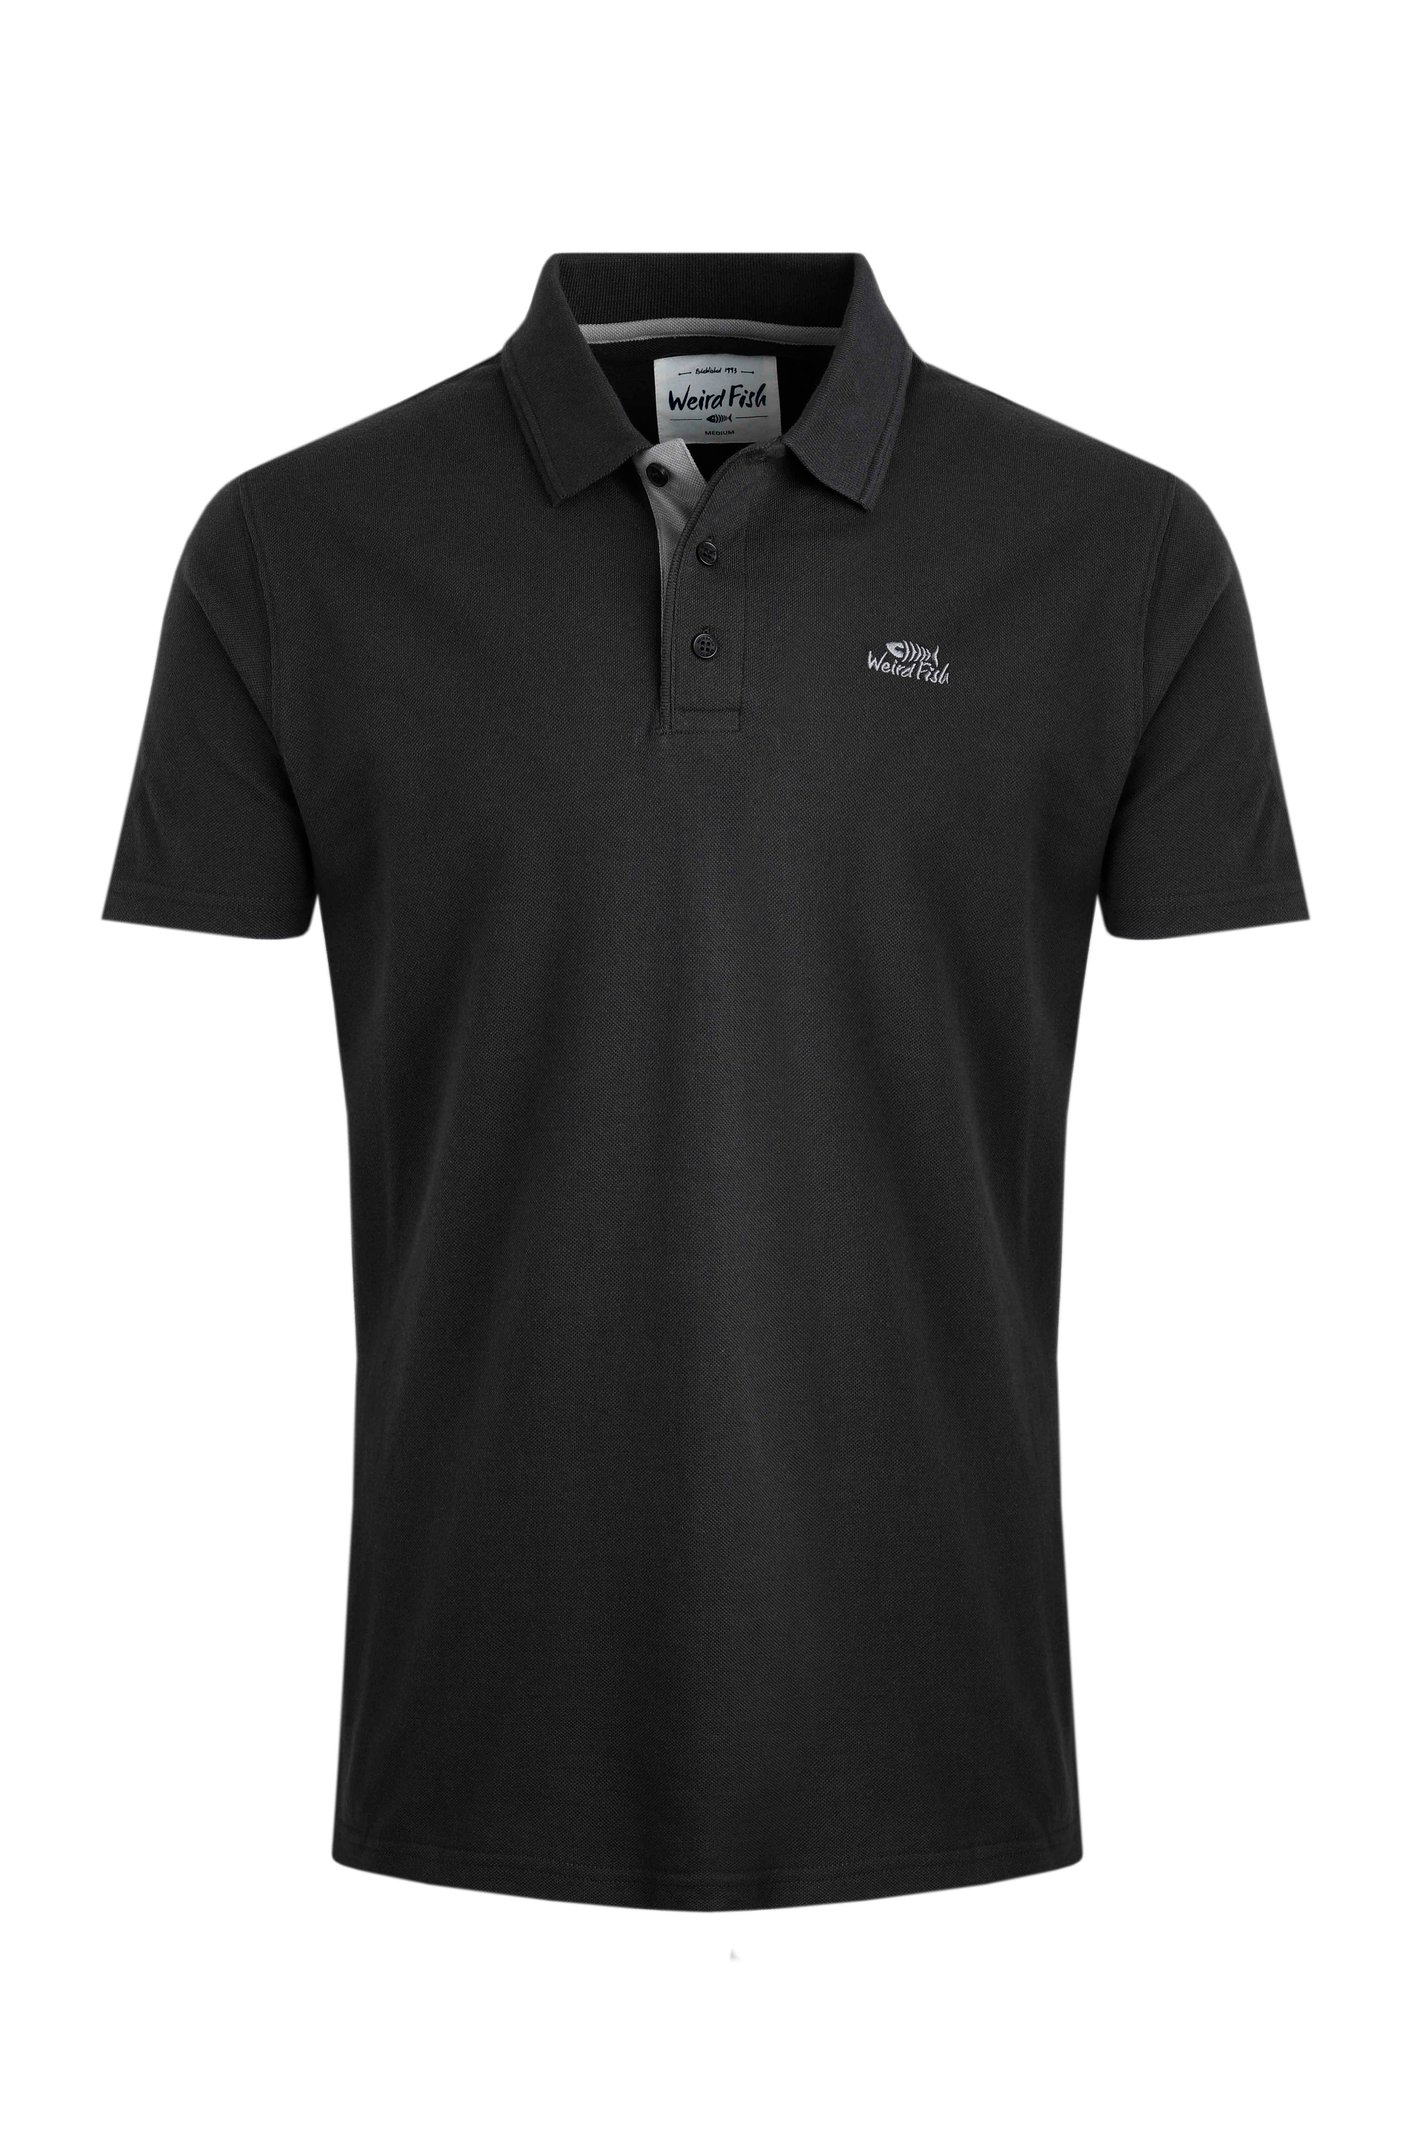 Weird Fish Miles Organic Pique Polo Washed Black Size 3XL